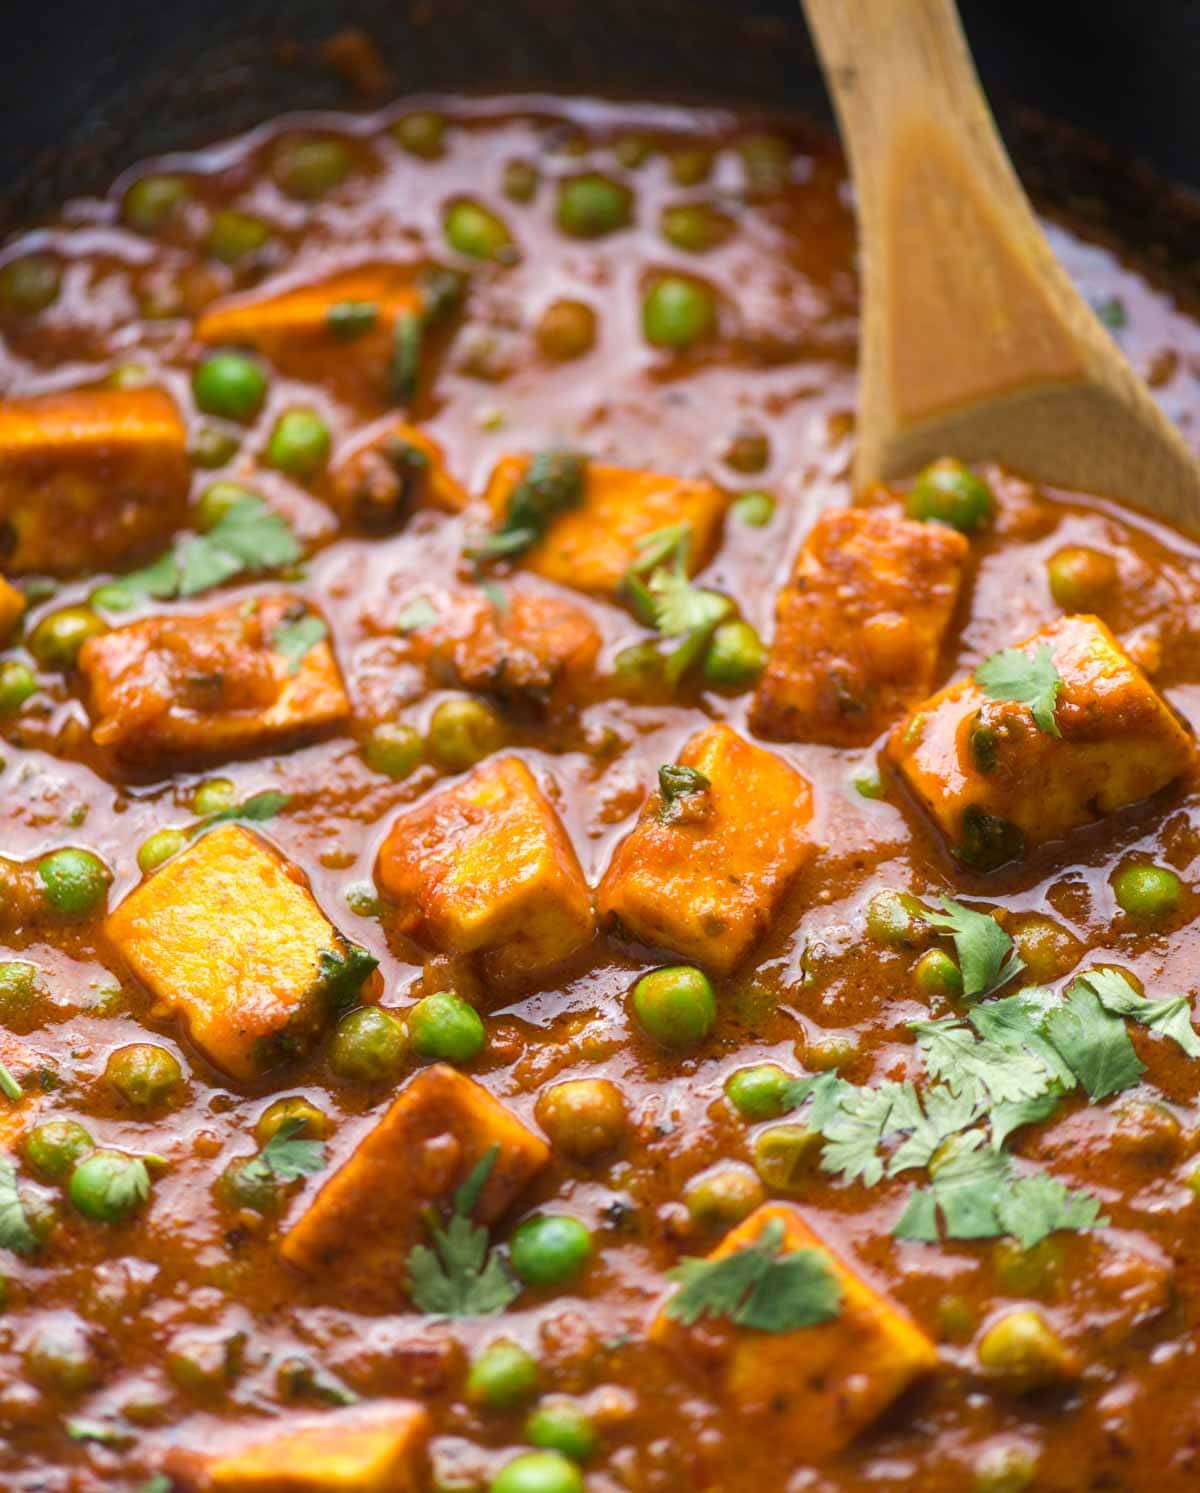 Soft paneer and matar in a flavorful onion tomato gravy, this recipe will remind you of your favorite restaurant for sure. Without any cream or cashew, this curry still is thick and perfect to scoop with roti or naan. 